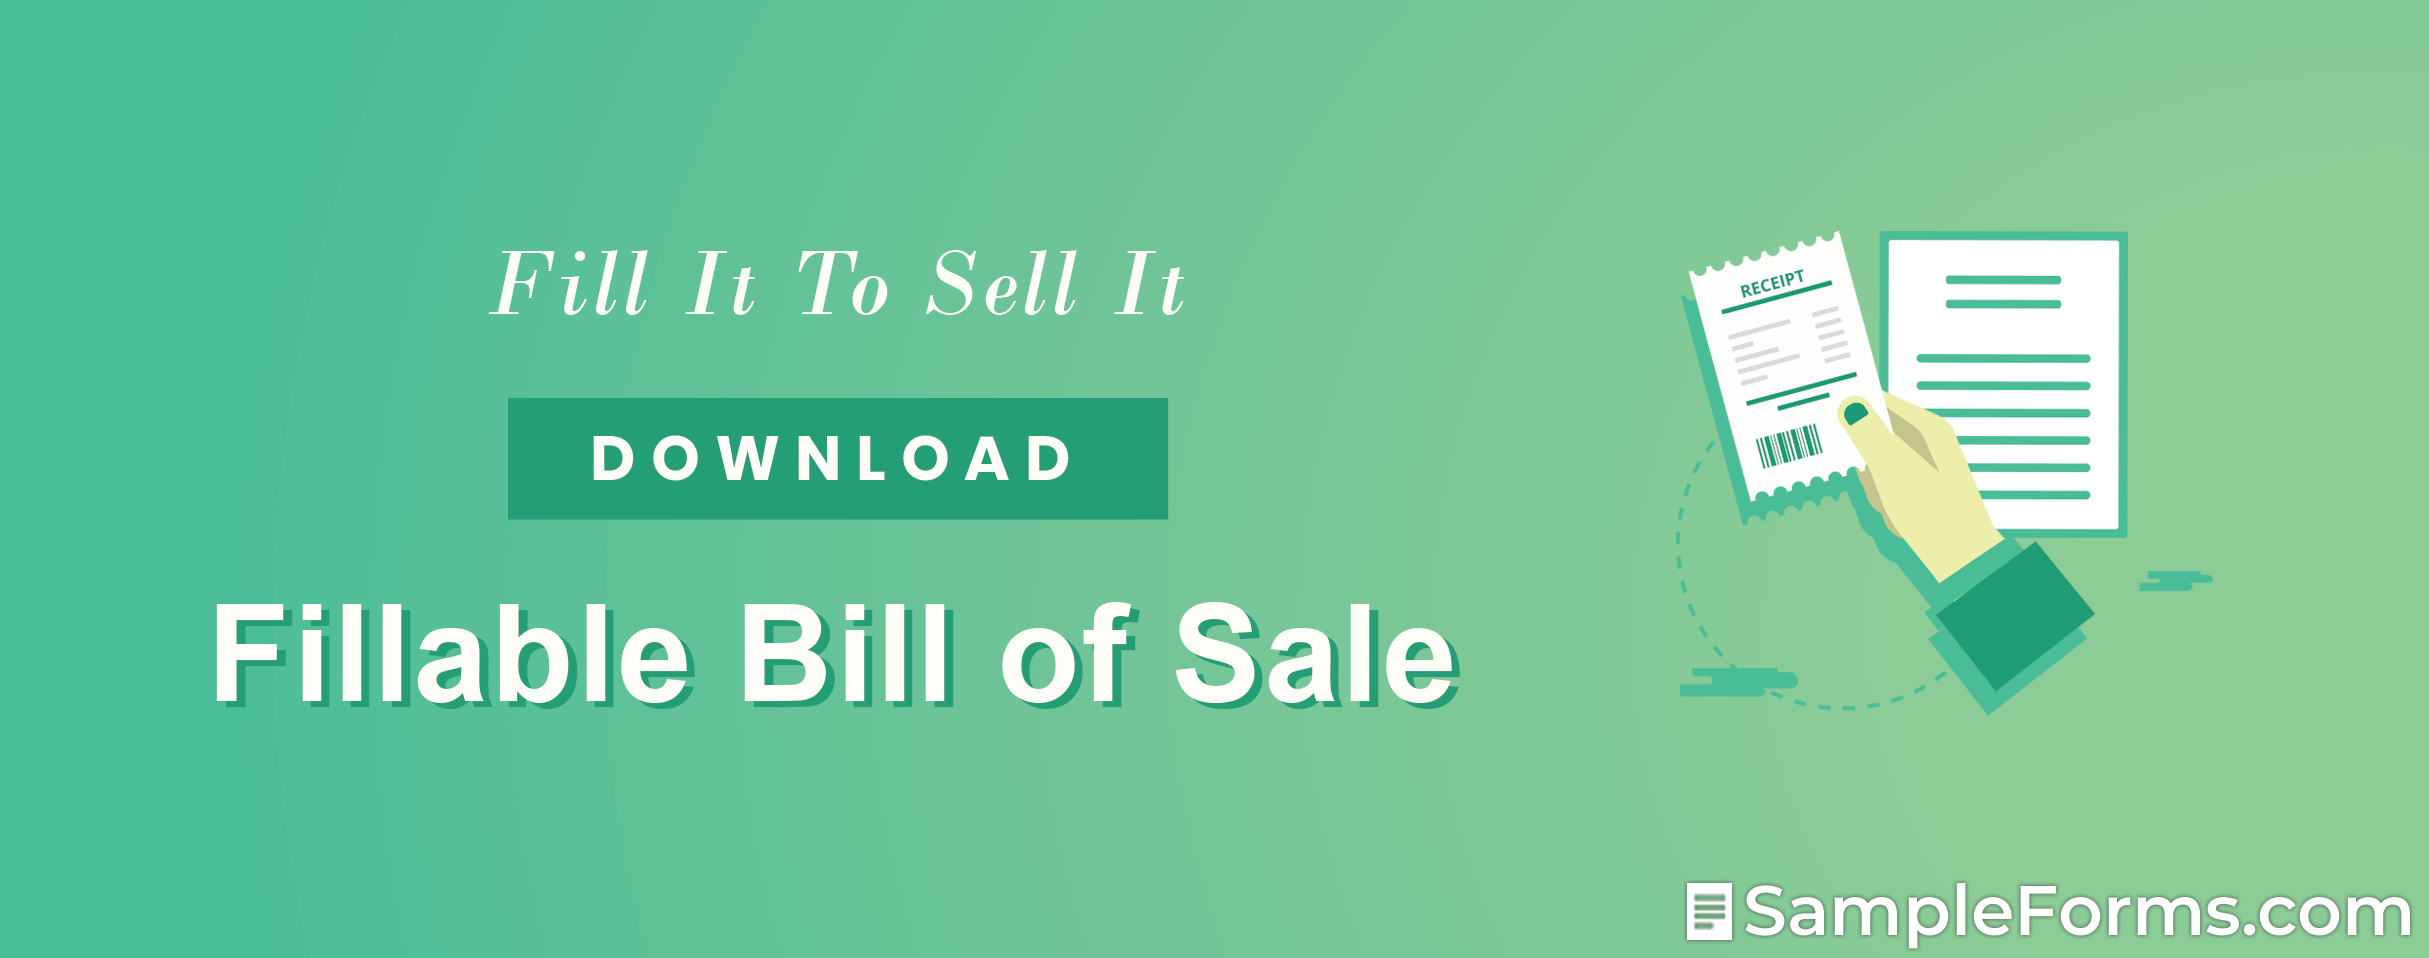 Fillable Bill of Sale Form